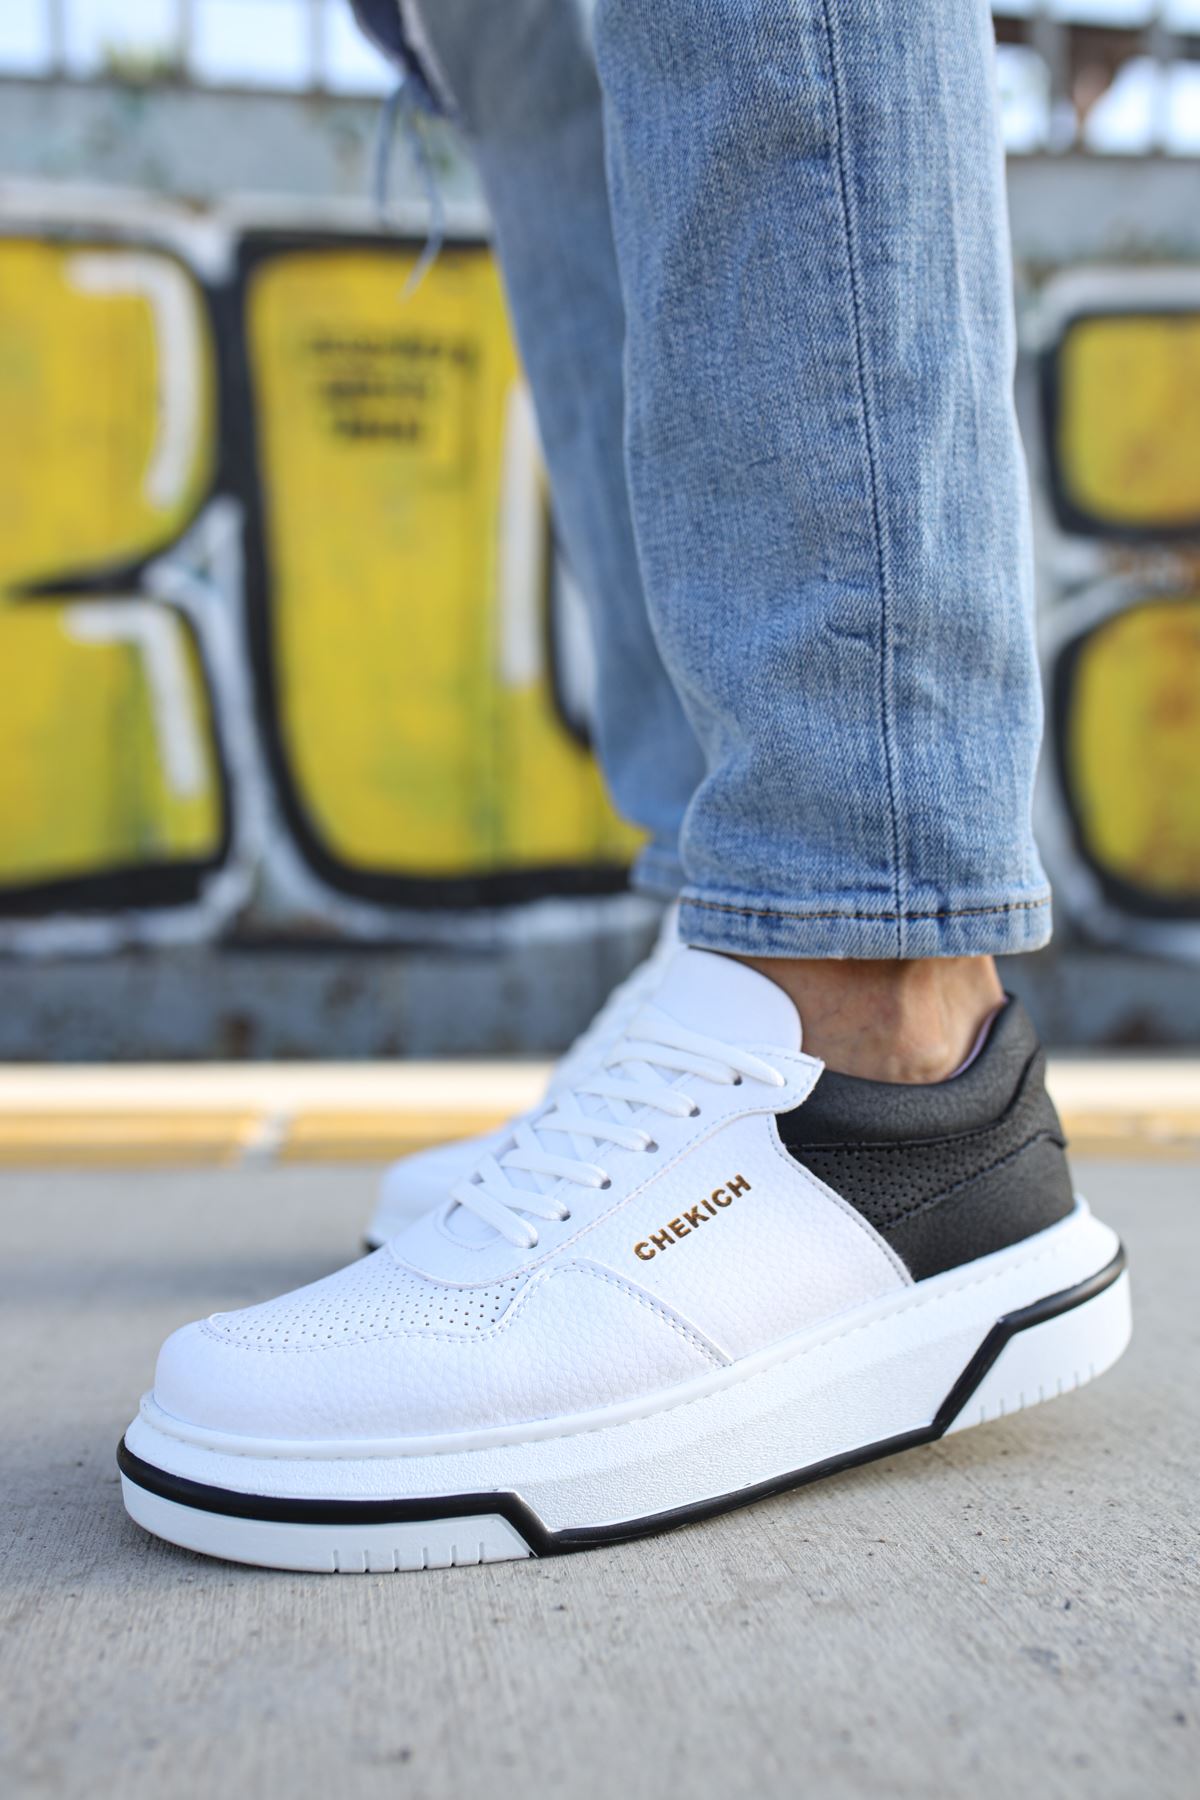 CH075 Men's Unisex White Casual Sneaker Sports Shoes - STREETMODE™